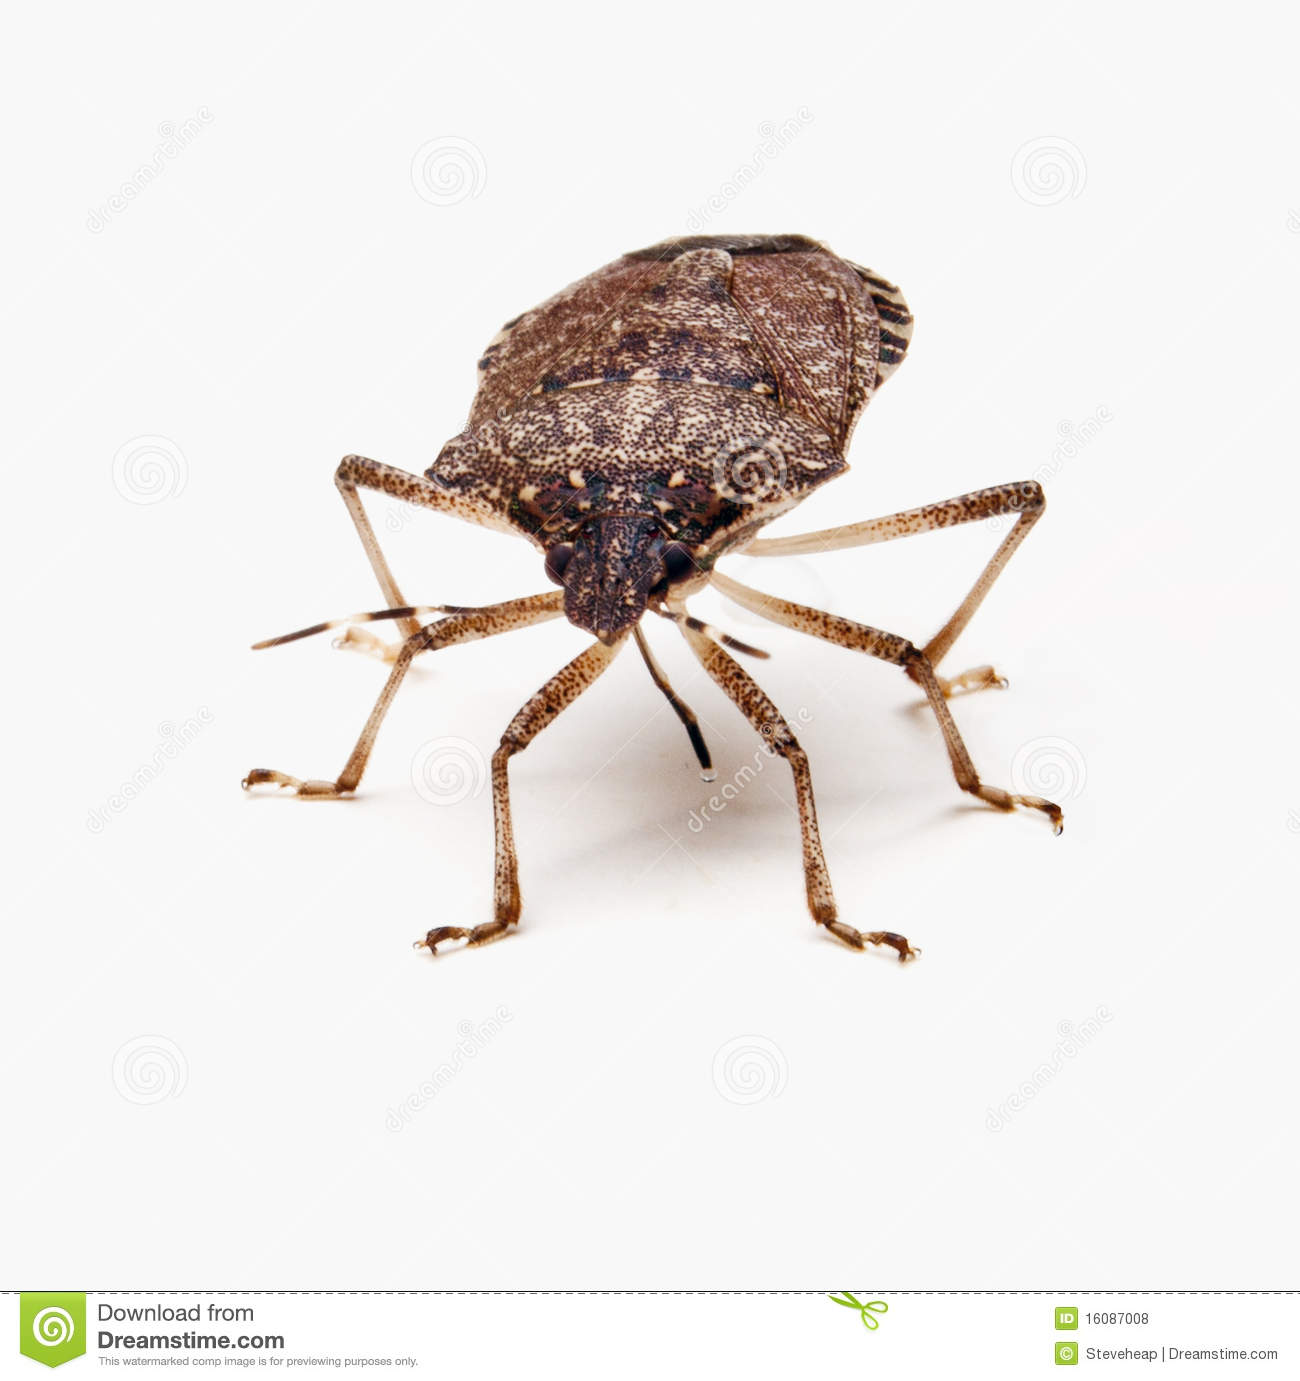 Brown Marmorated Stink Bug Or Shield Bug Isolated Against White